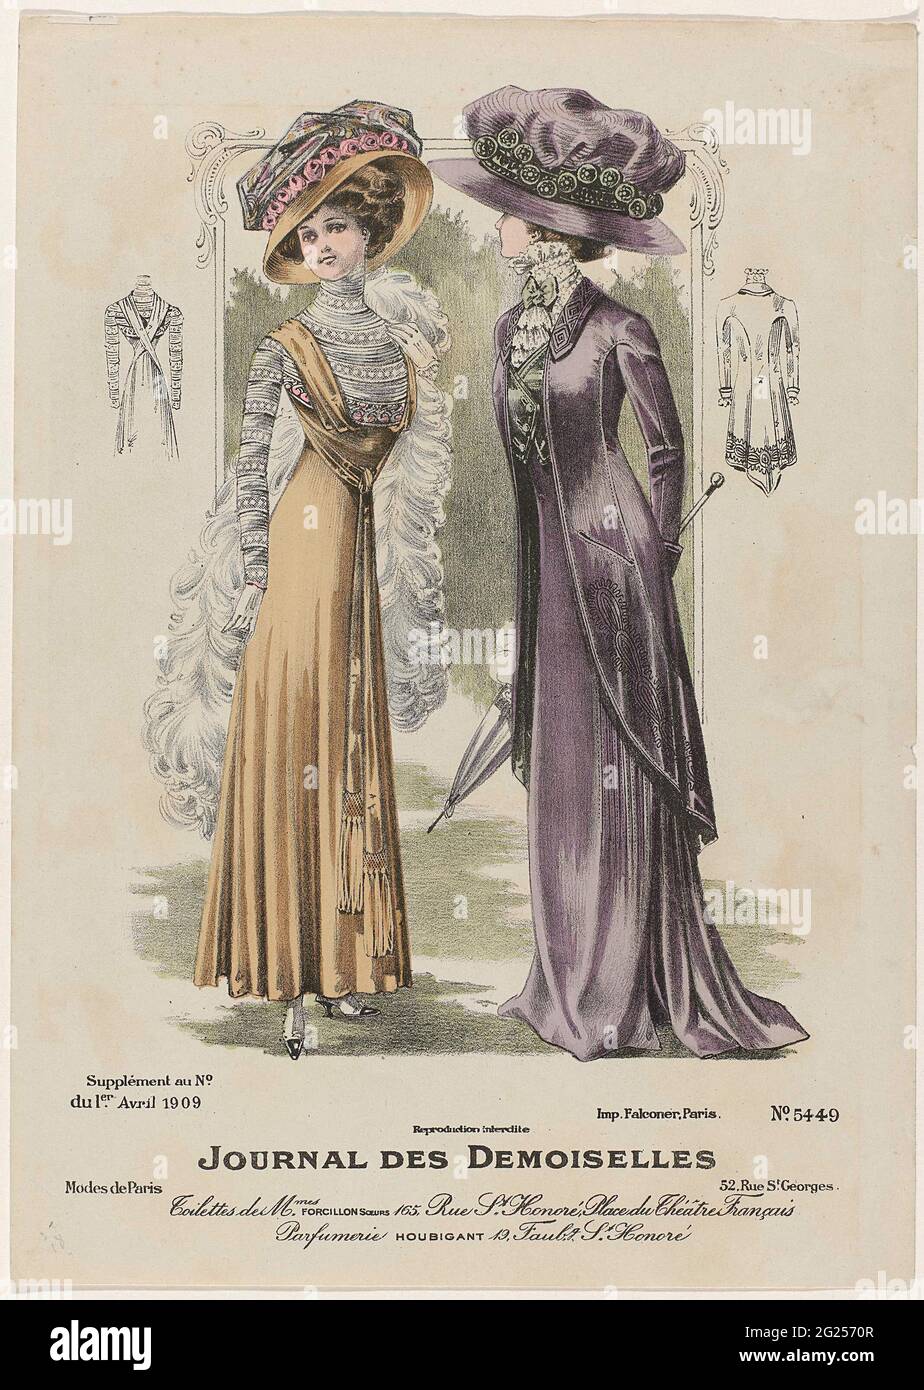 Journal des Demoiselles, Supplément Au No. Du 1 Avril 1909, No. 5449: Toilet's toilets (...). Woman in a single-length clot with high waist, whose shoulder straps come together in a knot; tassels at the ends. Striped body with long sleeves. Long stole around the shoulder. Large hat decorated with flowers. Woman in long jacket with rounded fronts on a short cardigan and long skirt with split. Guimpe (?) With bow. Beach umbrella(?). According to the caption, they wear 'toilets' from MMes Forcillon Soeurs. Print from the Mode magazine Journal des Demoiselles (1833 -1922). Stock Photo